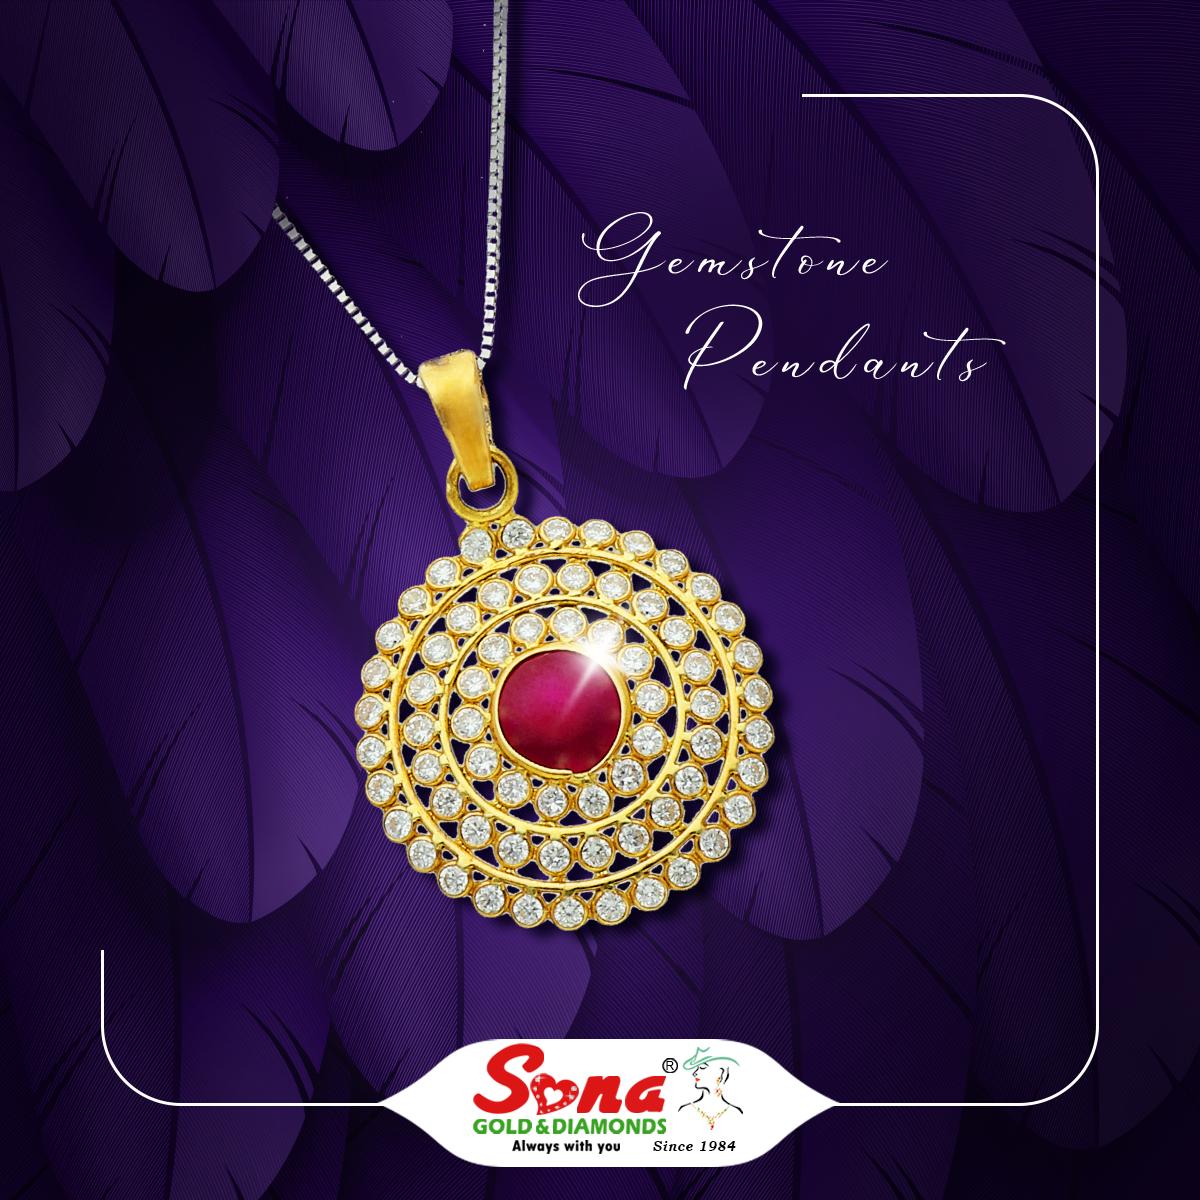 No matter what the trend is, Gemstones are always in!. Grab yours from Sona Gold & Diamonds.

#SonaGoldandDiamonds #JewelleryCollections #pendantcollection #bestpendant #weddingpendant #partypendant #pendants #pendant #beautifulpendant